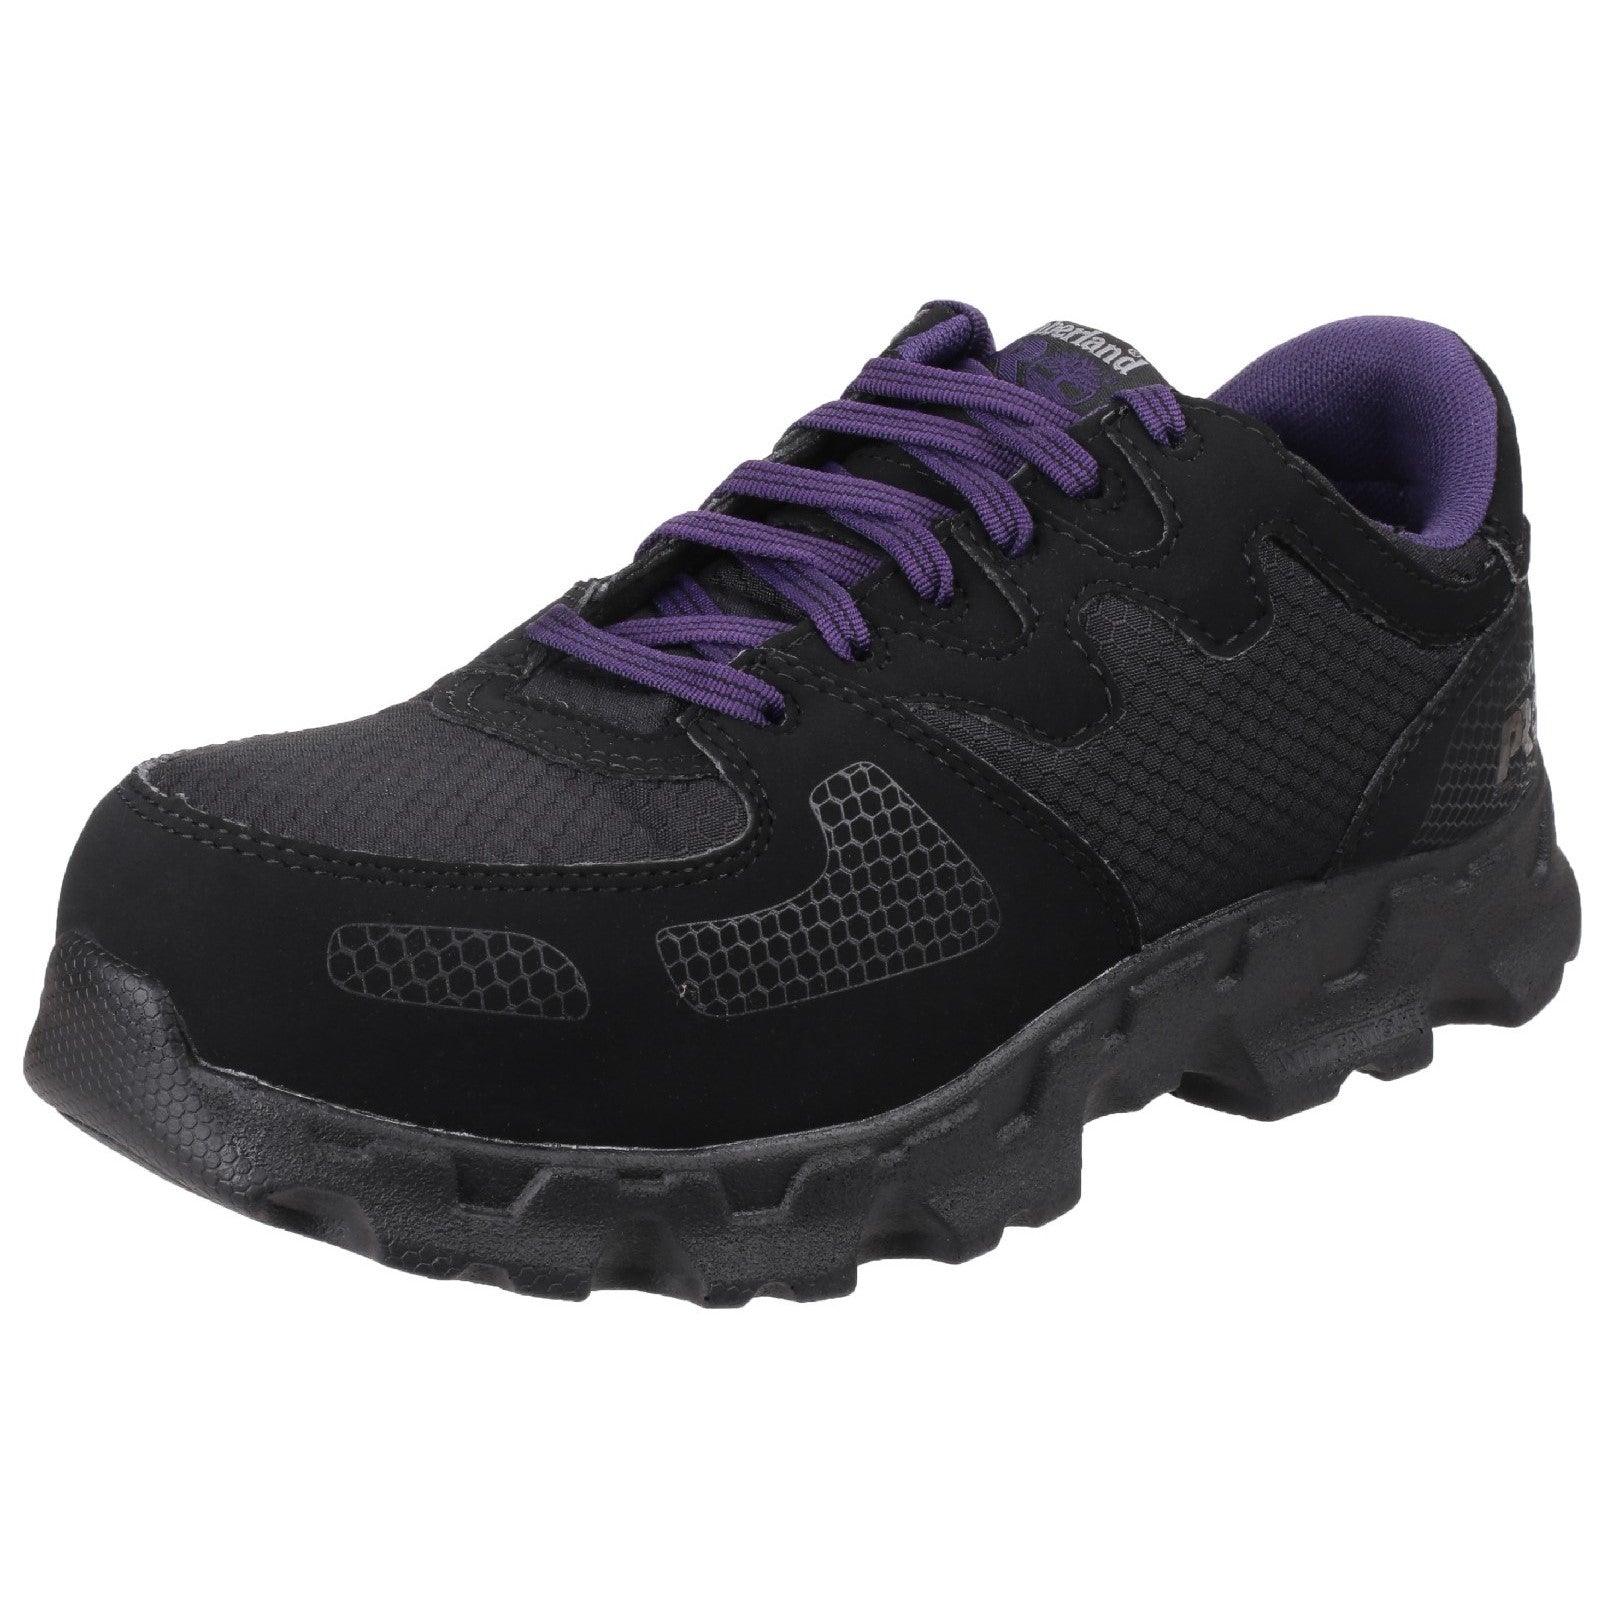 Powertrain Low Lace-up Safety Shoe